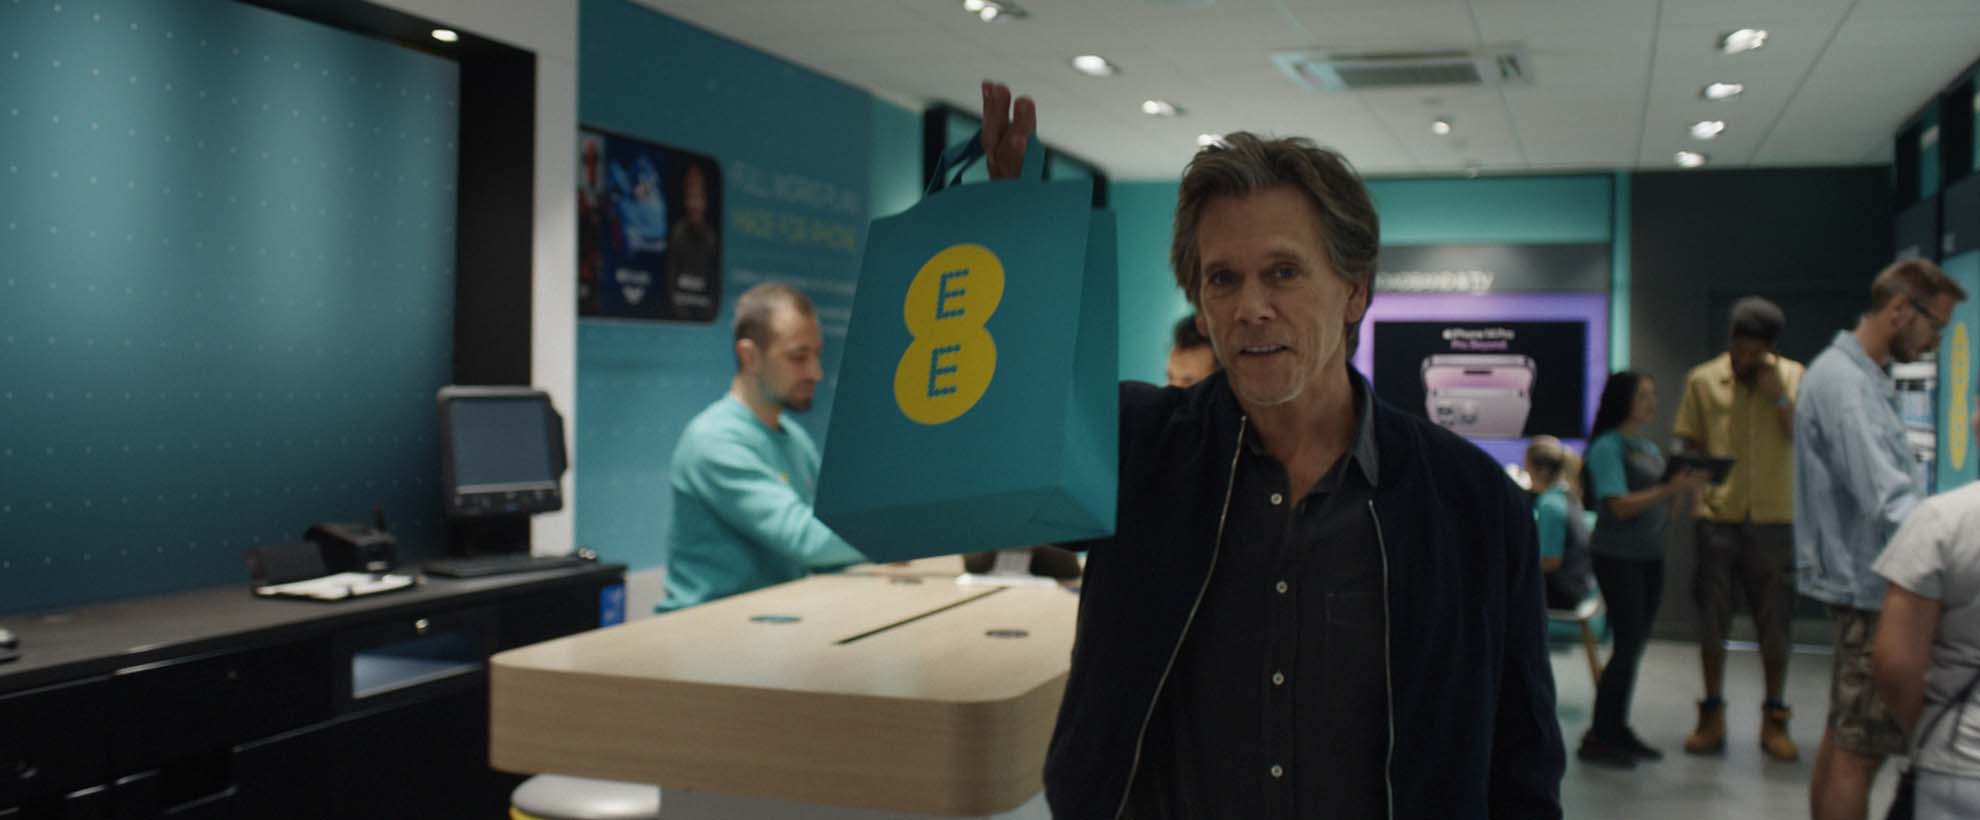 Actor Kevin Bacon holds an EE branded shopping bag